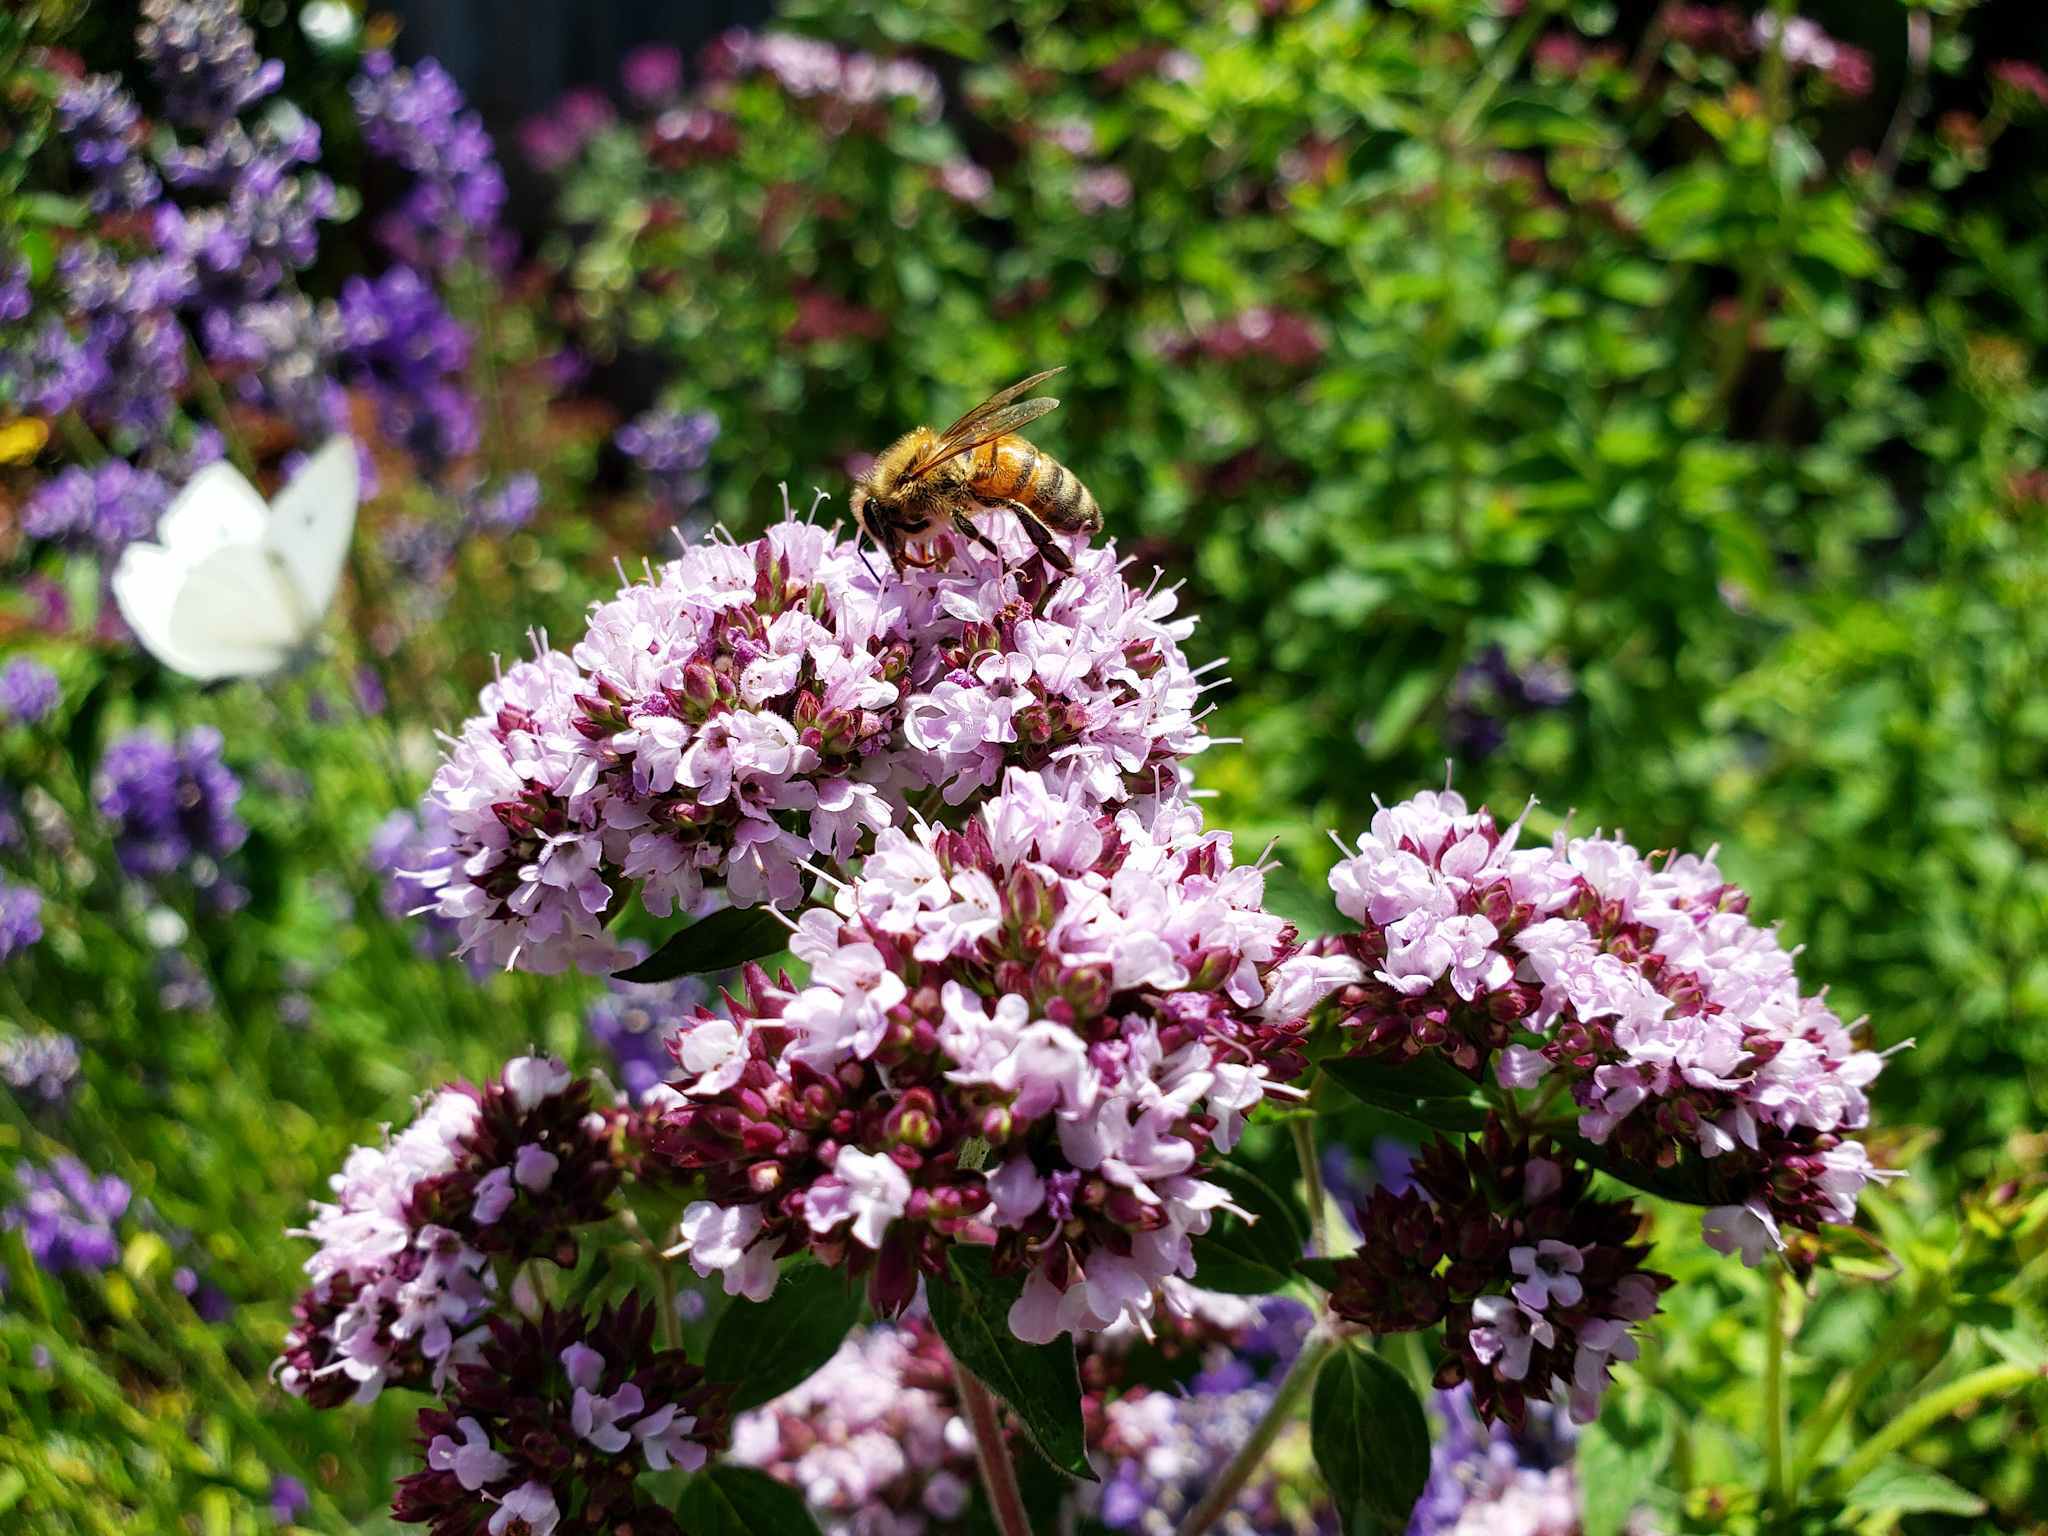 A bee is perched on top of Italian Oregano blooms, which are very small light pink-purple clusters of flowers.  